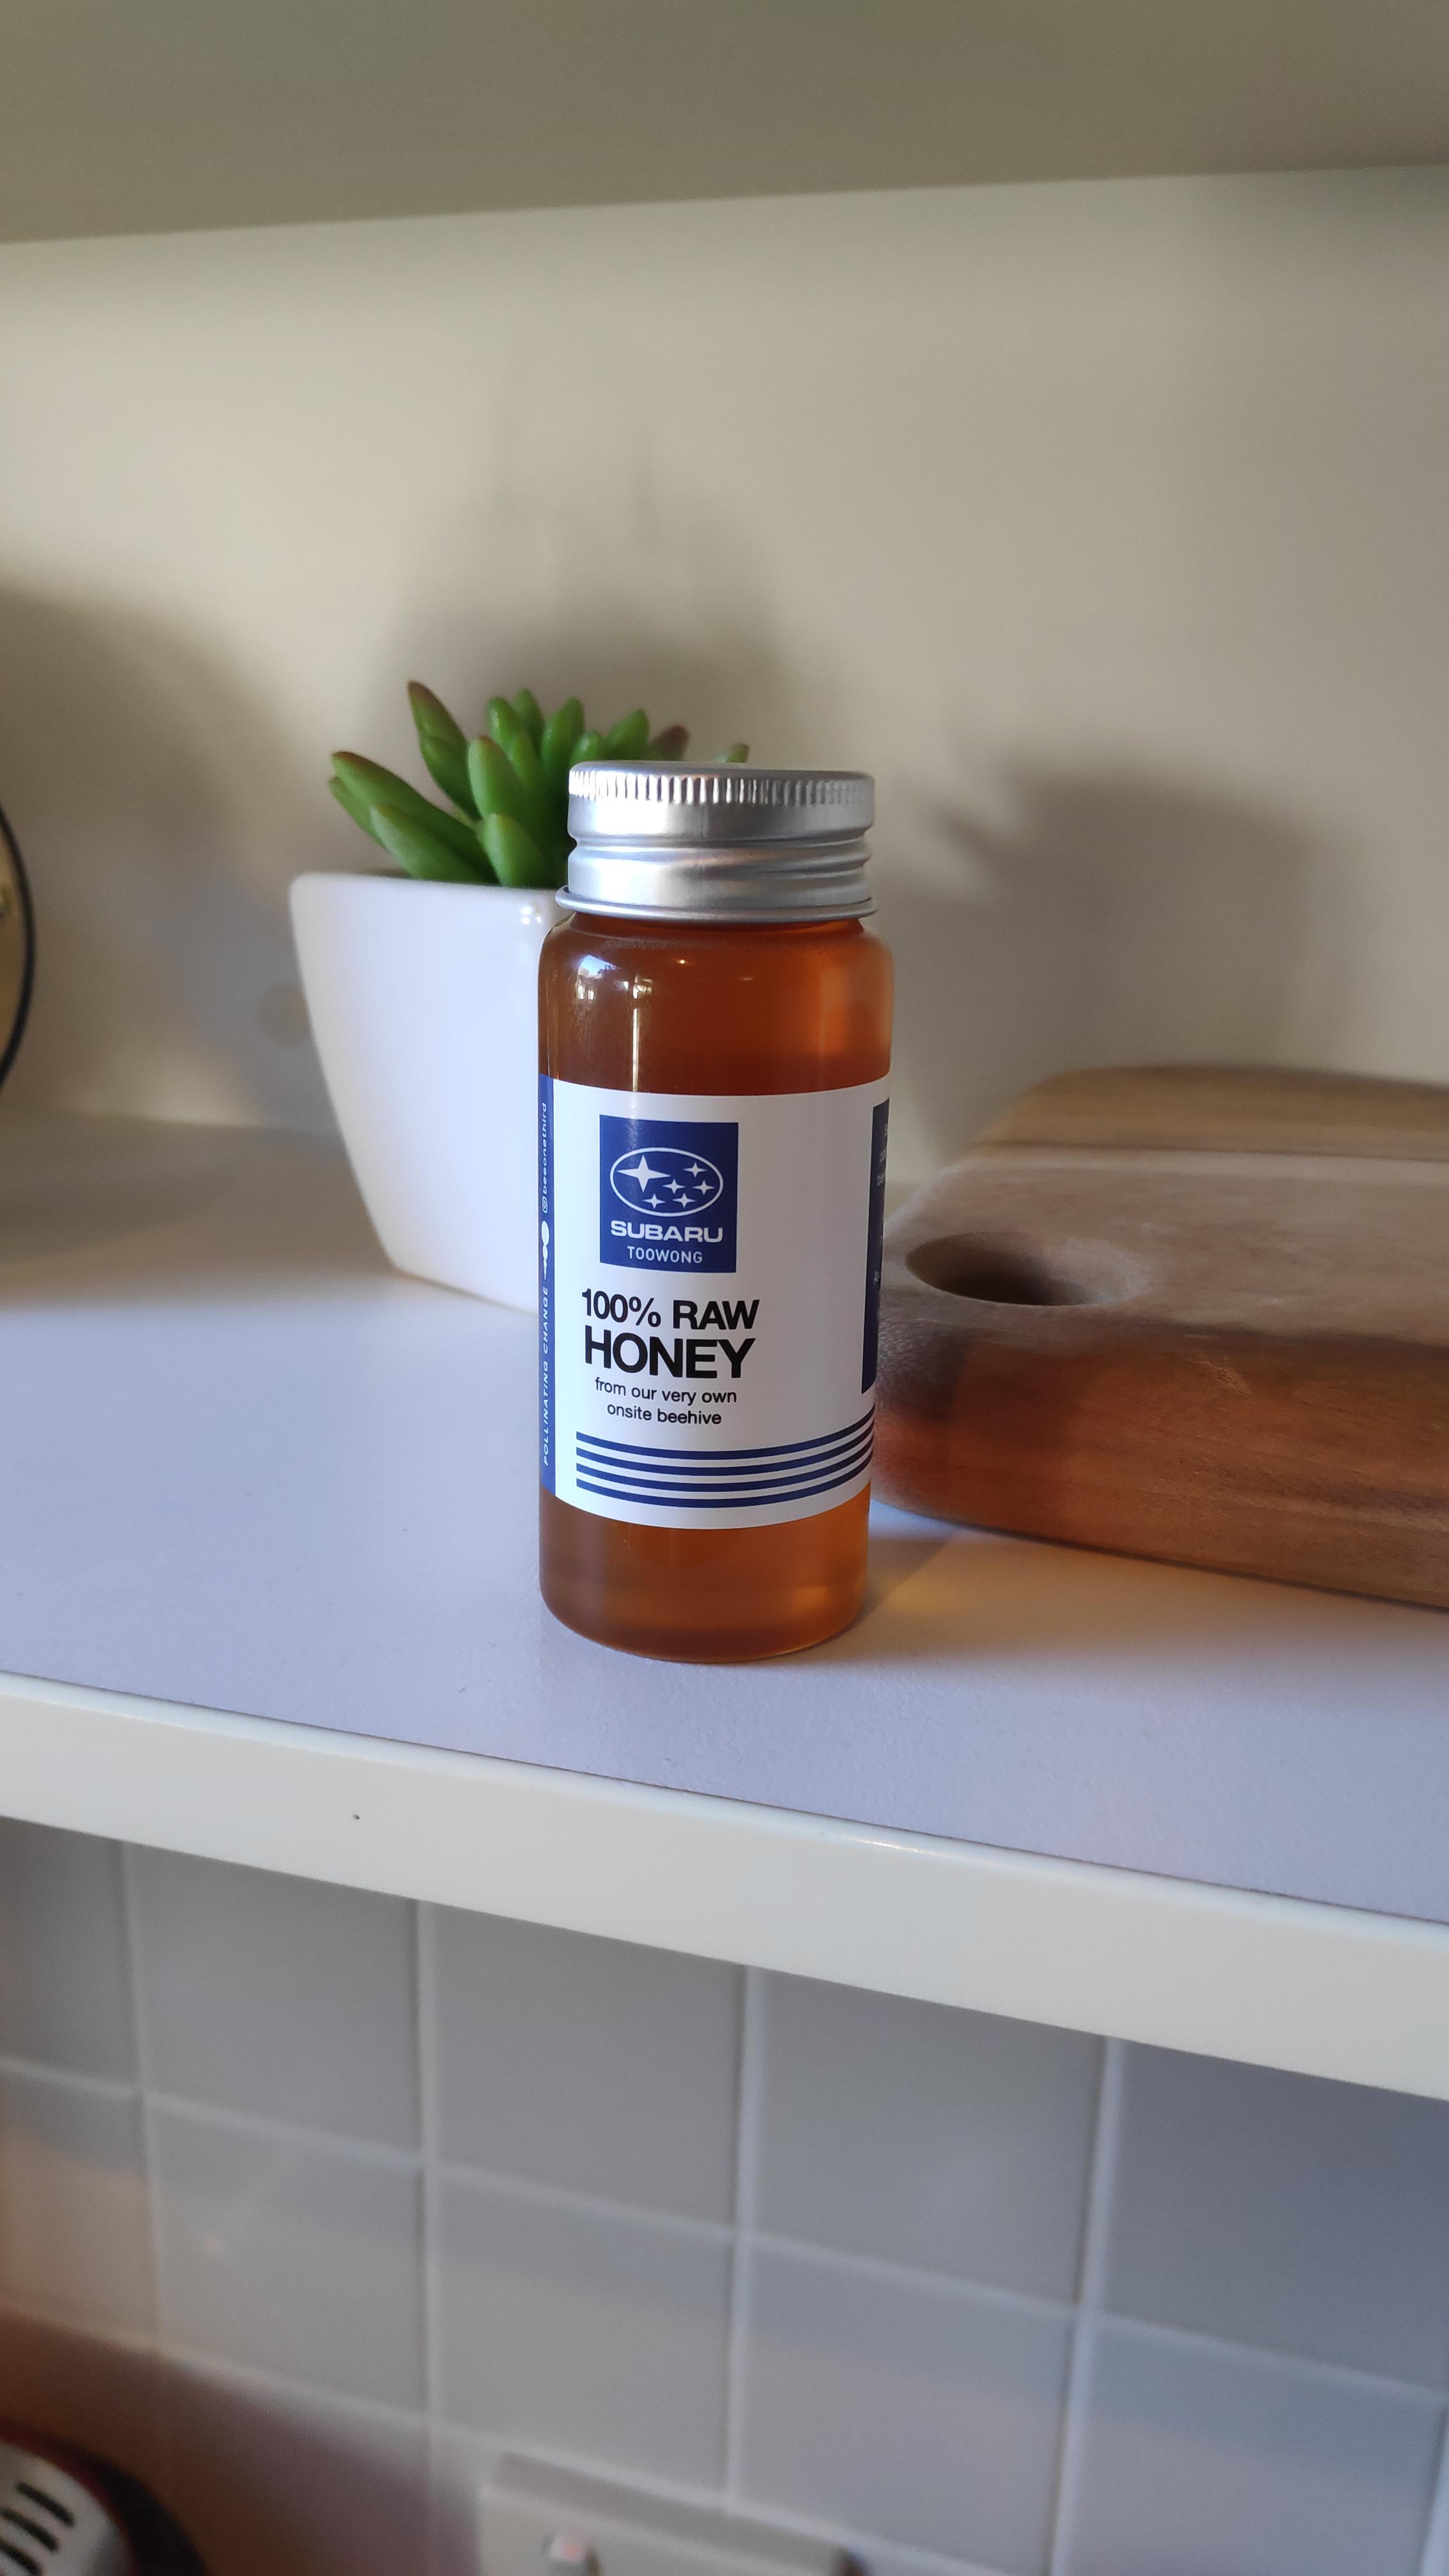 Local Subaru dealership harvested honey from their rooftop.